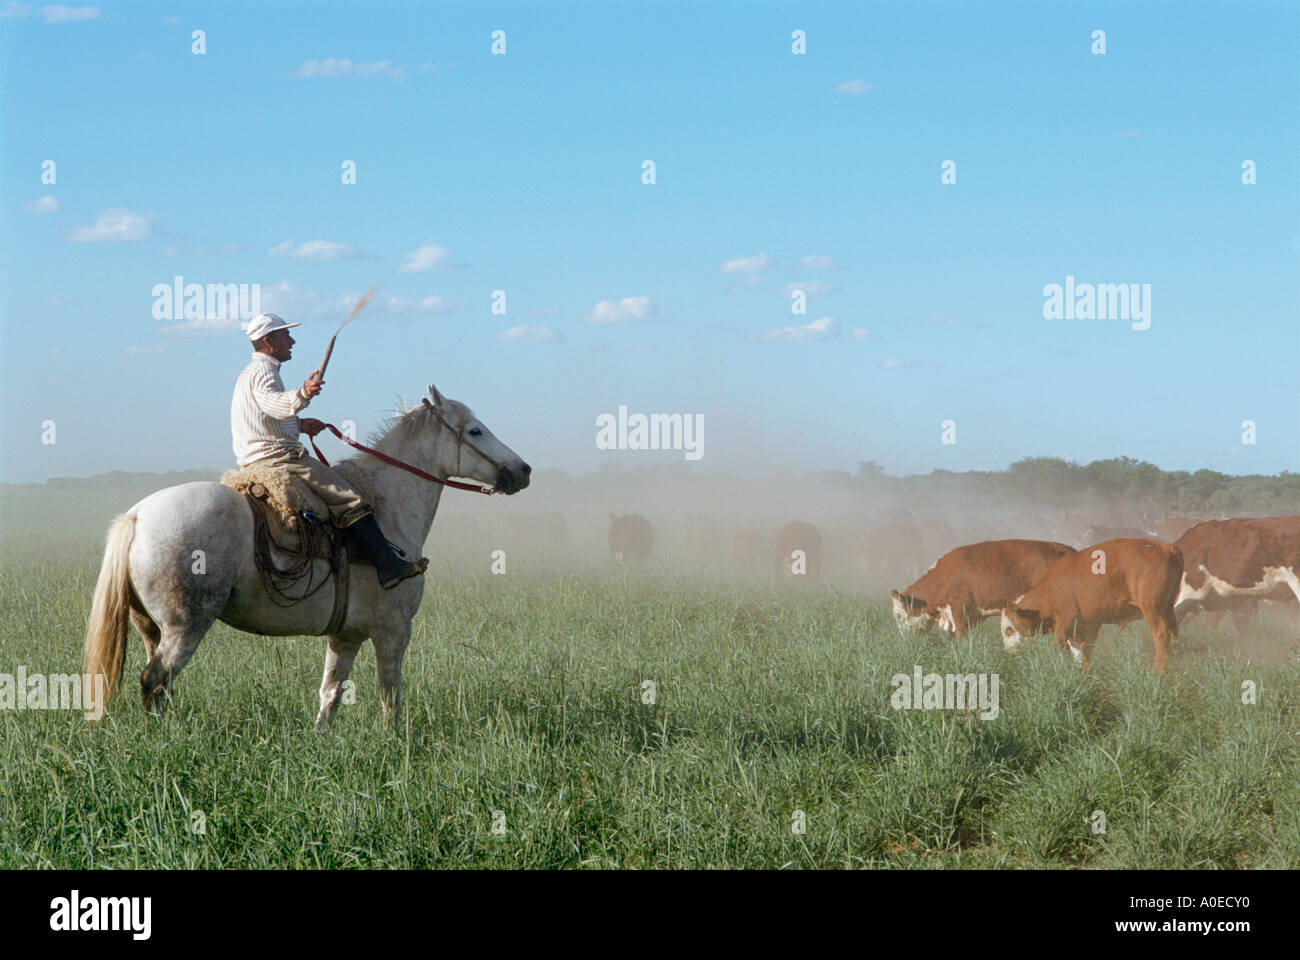 A Gaucho on horseback rounding up cattle herd Pampas Argentina Stock Photo